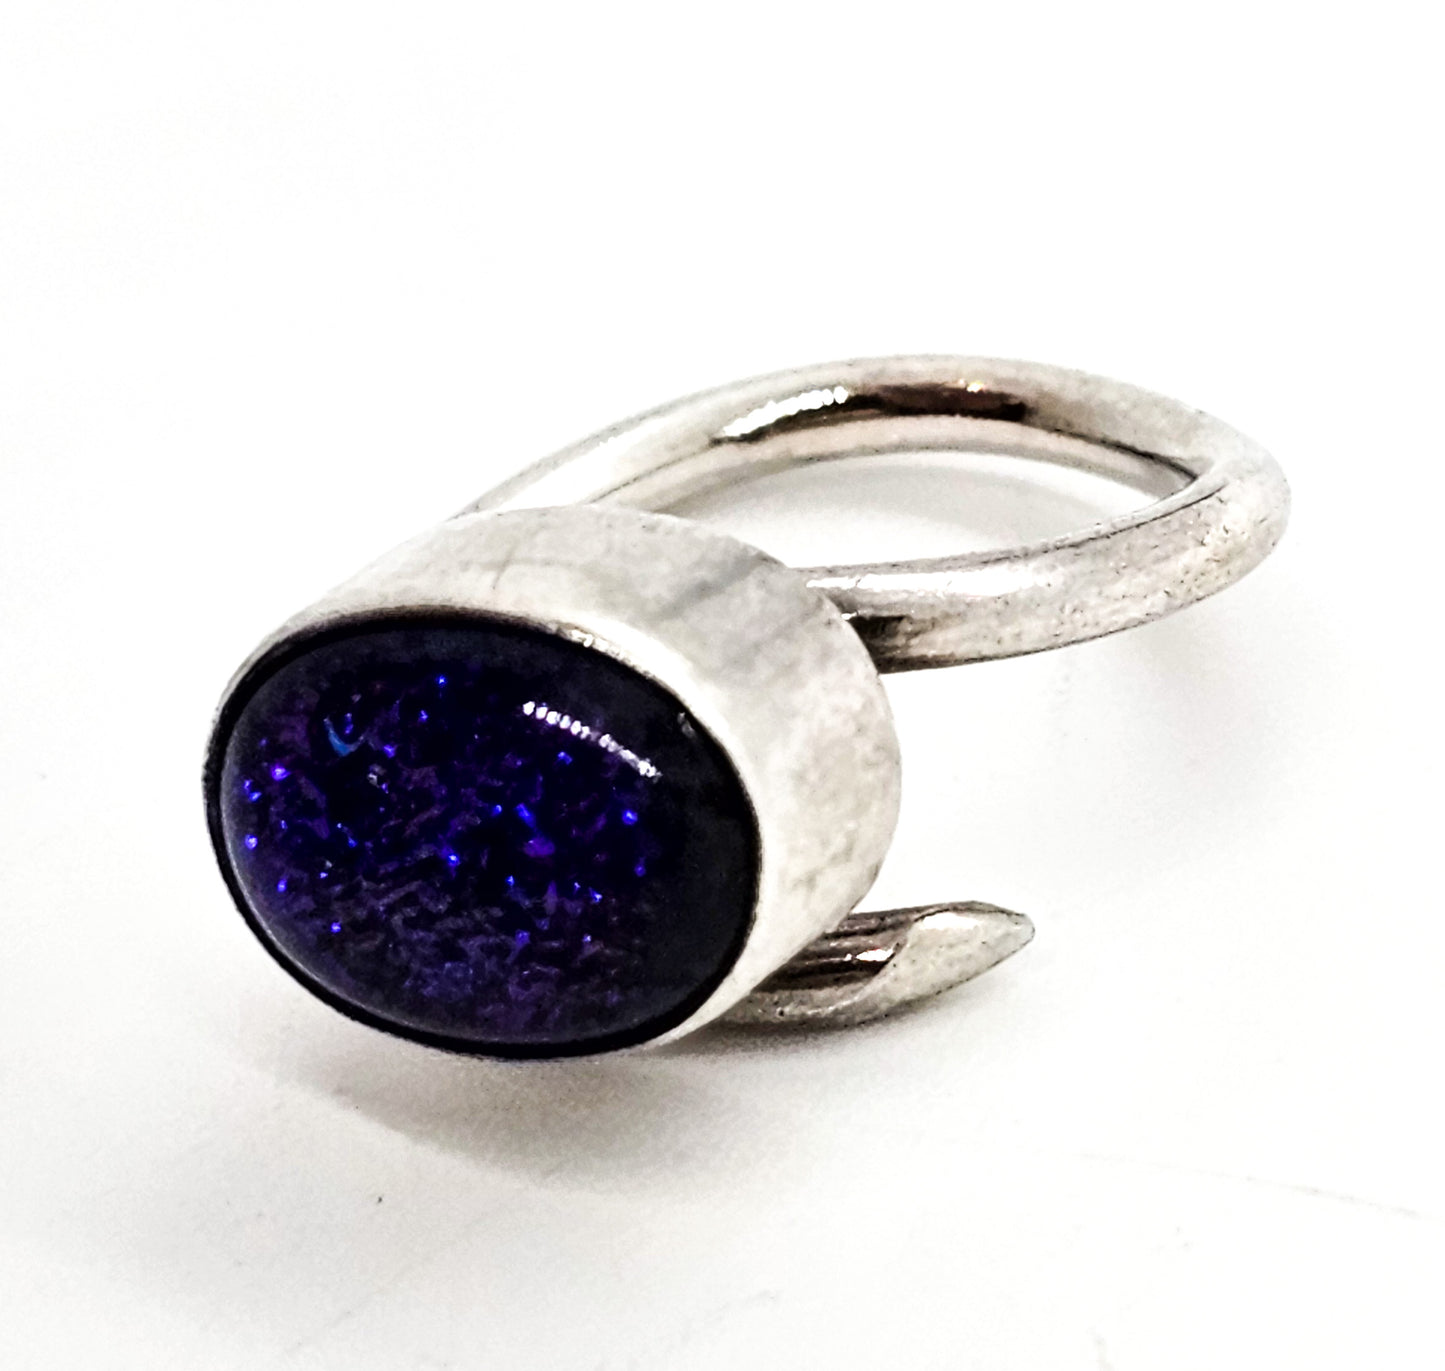 Blue Dichroic glass sterling silver torsade adjustable wrap sterling silver ring size 7.5